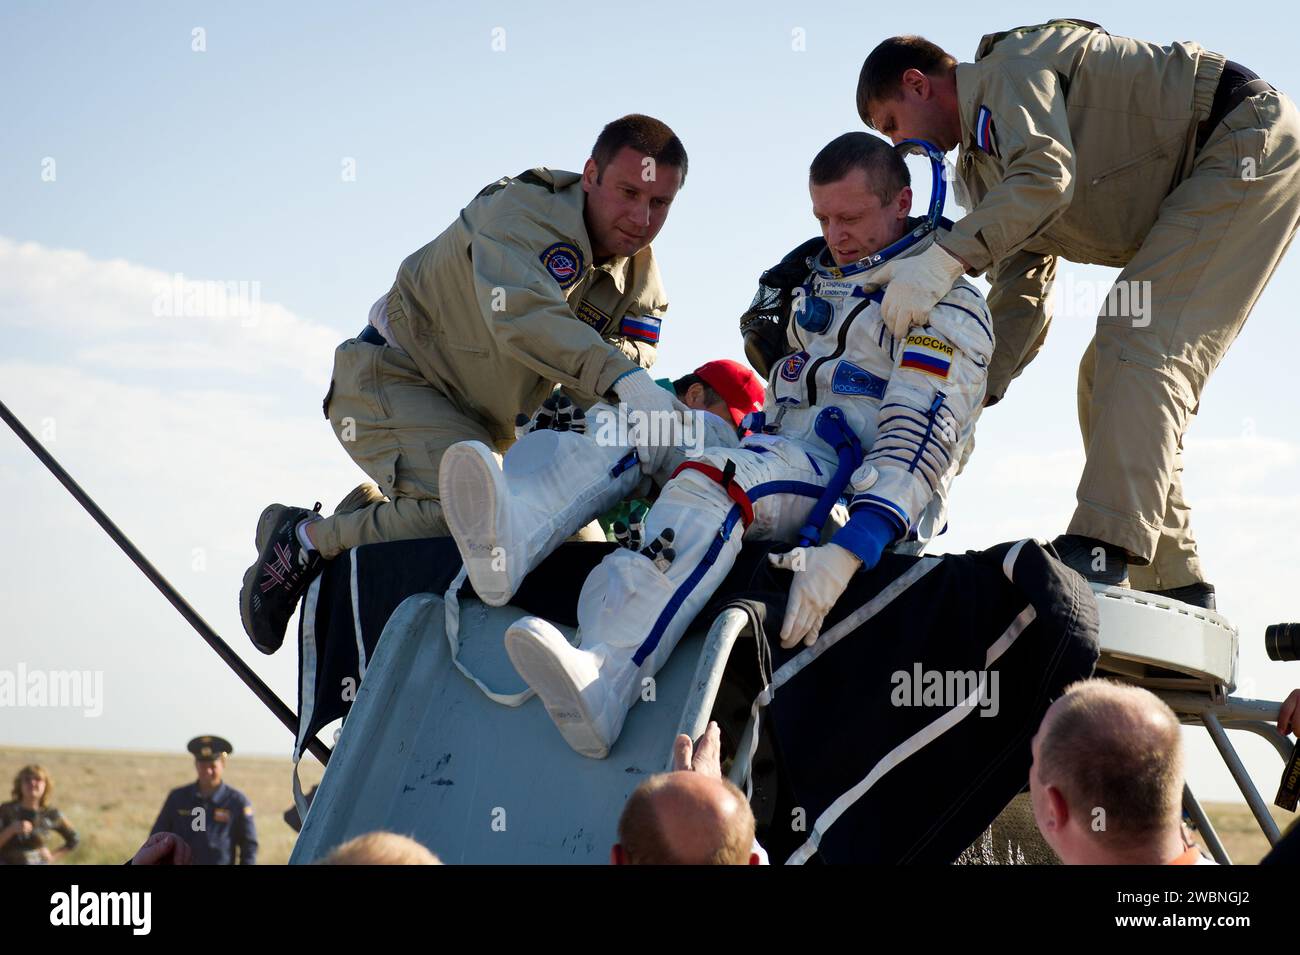 Expedition 27 Commander Dmitry Kondratyev is helped out of the Spyuz TMA-20 spacecraft shortly after he and Flight Engineers Cady Coleman and Paolo Nespoli landed southeast of the town of Zhezkazgan, Kazakhstan, on Tuesday, May 24, 2011.  NASA Astronaut Coleman, Russian Cosmonaut Kondratyev and Italian Astronaut Nespoli are returning from more than five months onboard the International Space Station where they served as members of the Expedition 26 and 27 crews. Stock Photo